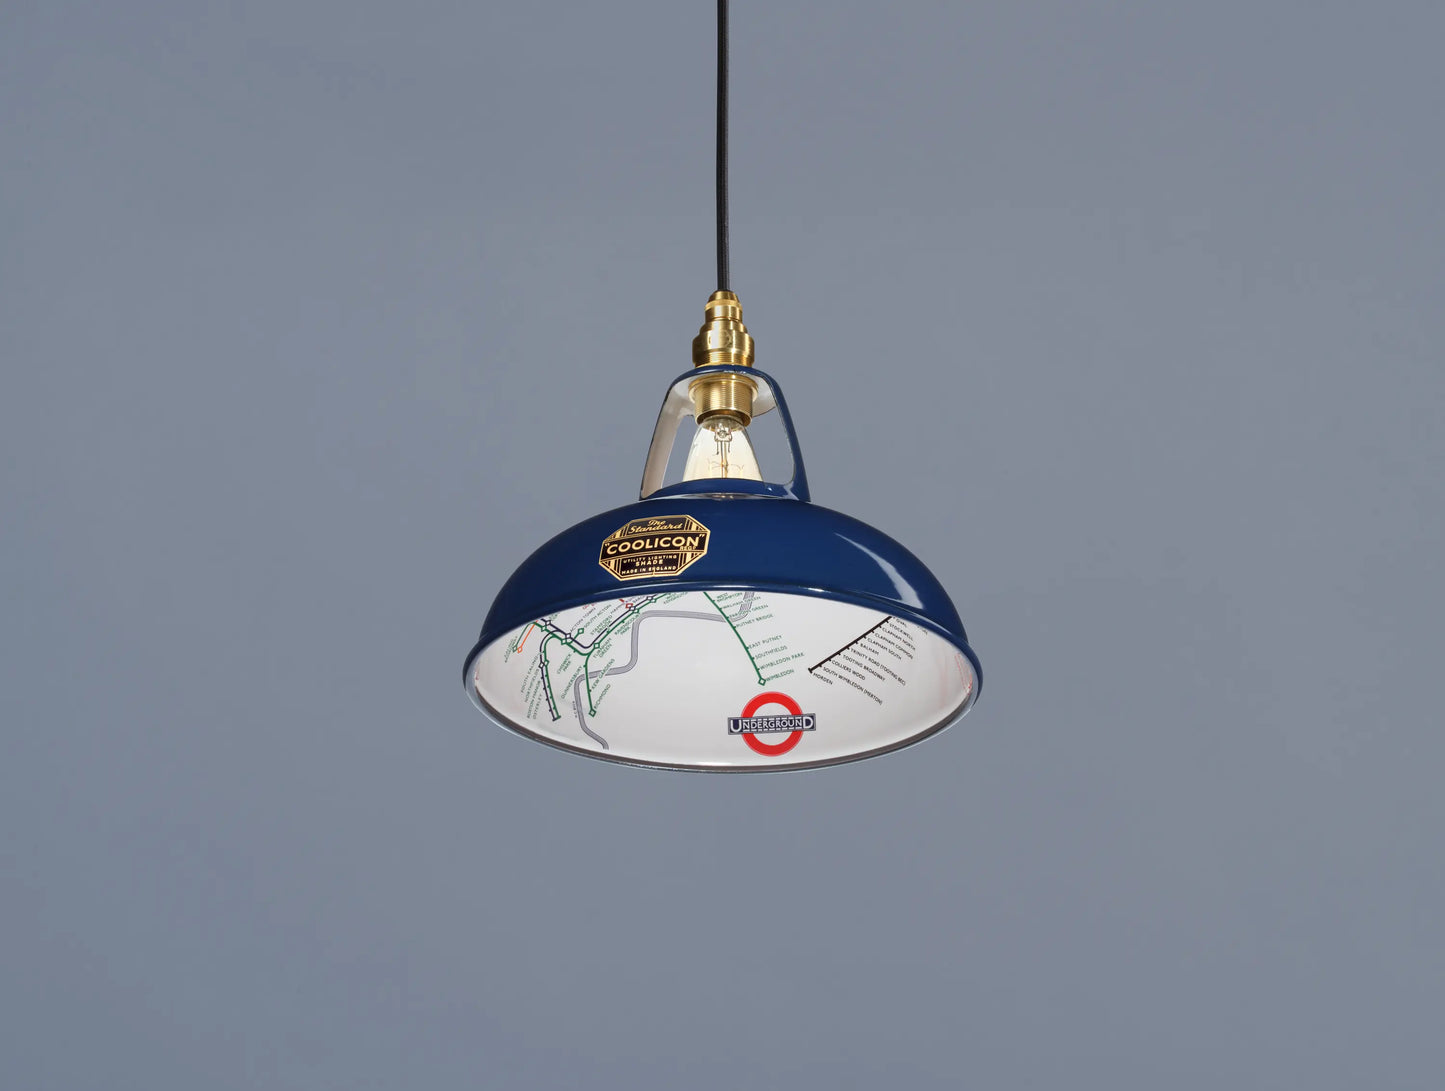 An Original Piccadilly Line Blue shade hanging over a blue background